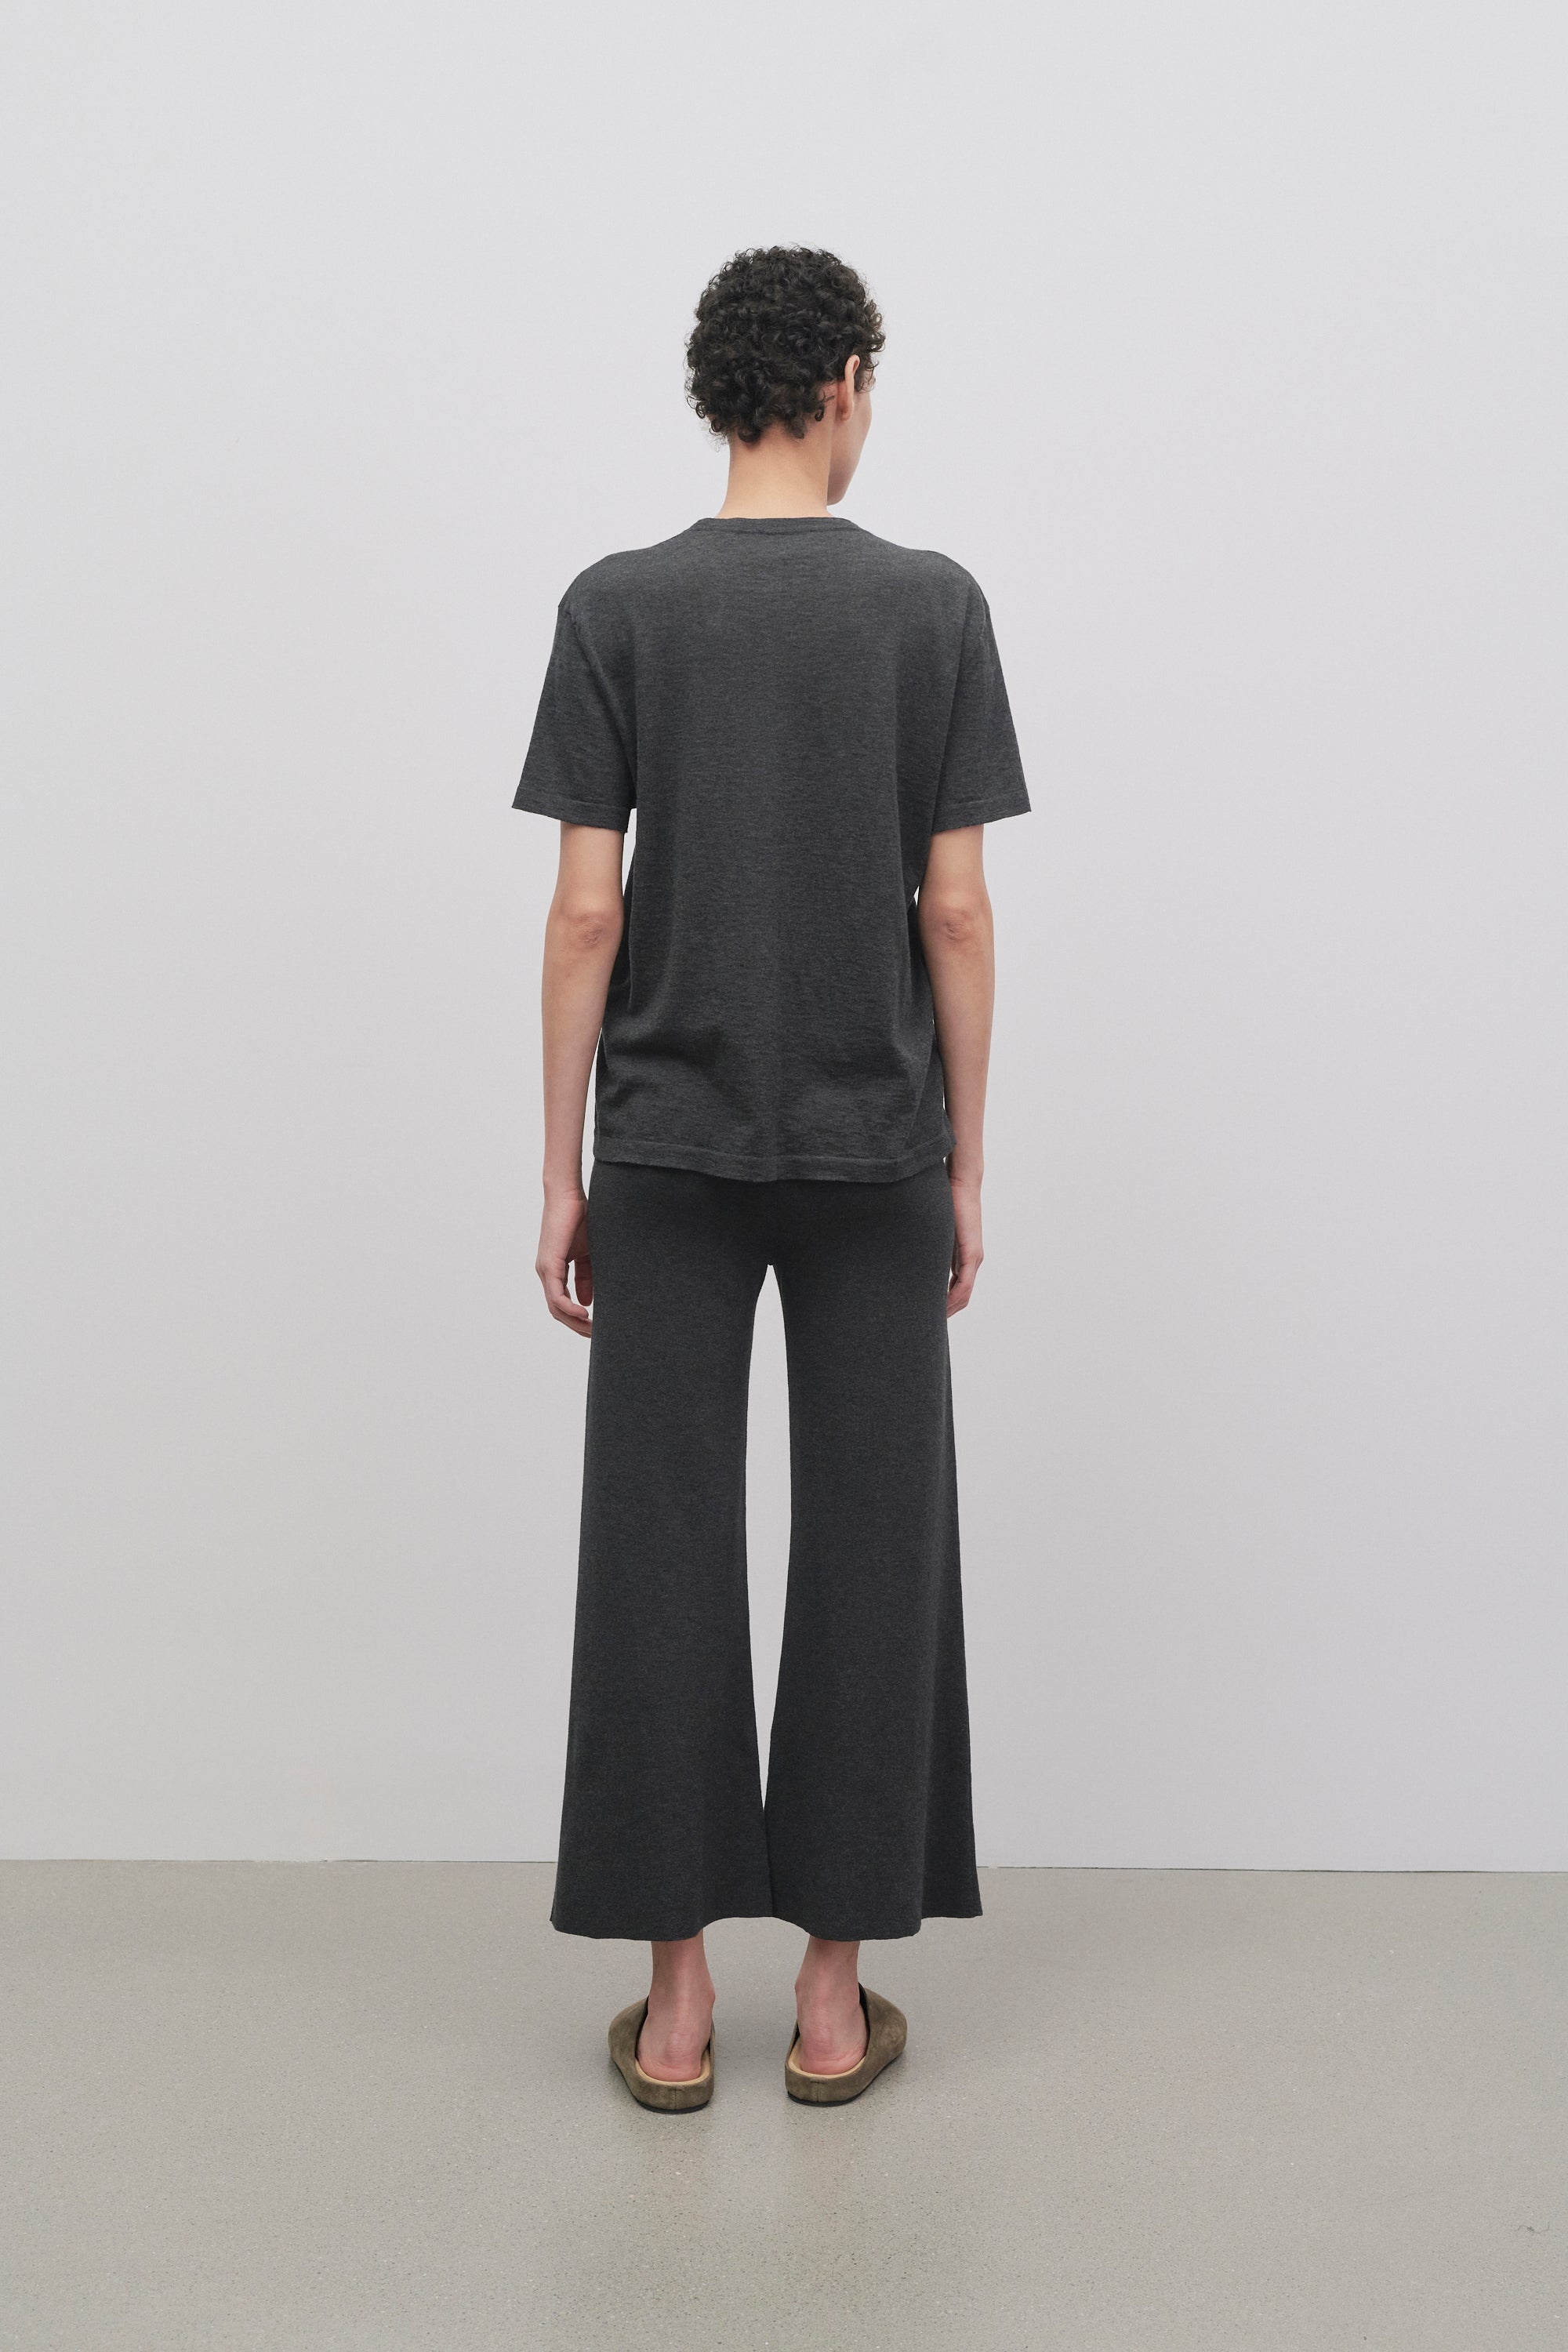 Folondo Pants in Cotton and Cashmere - 5